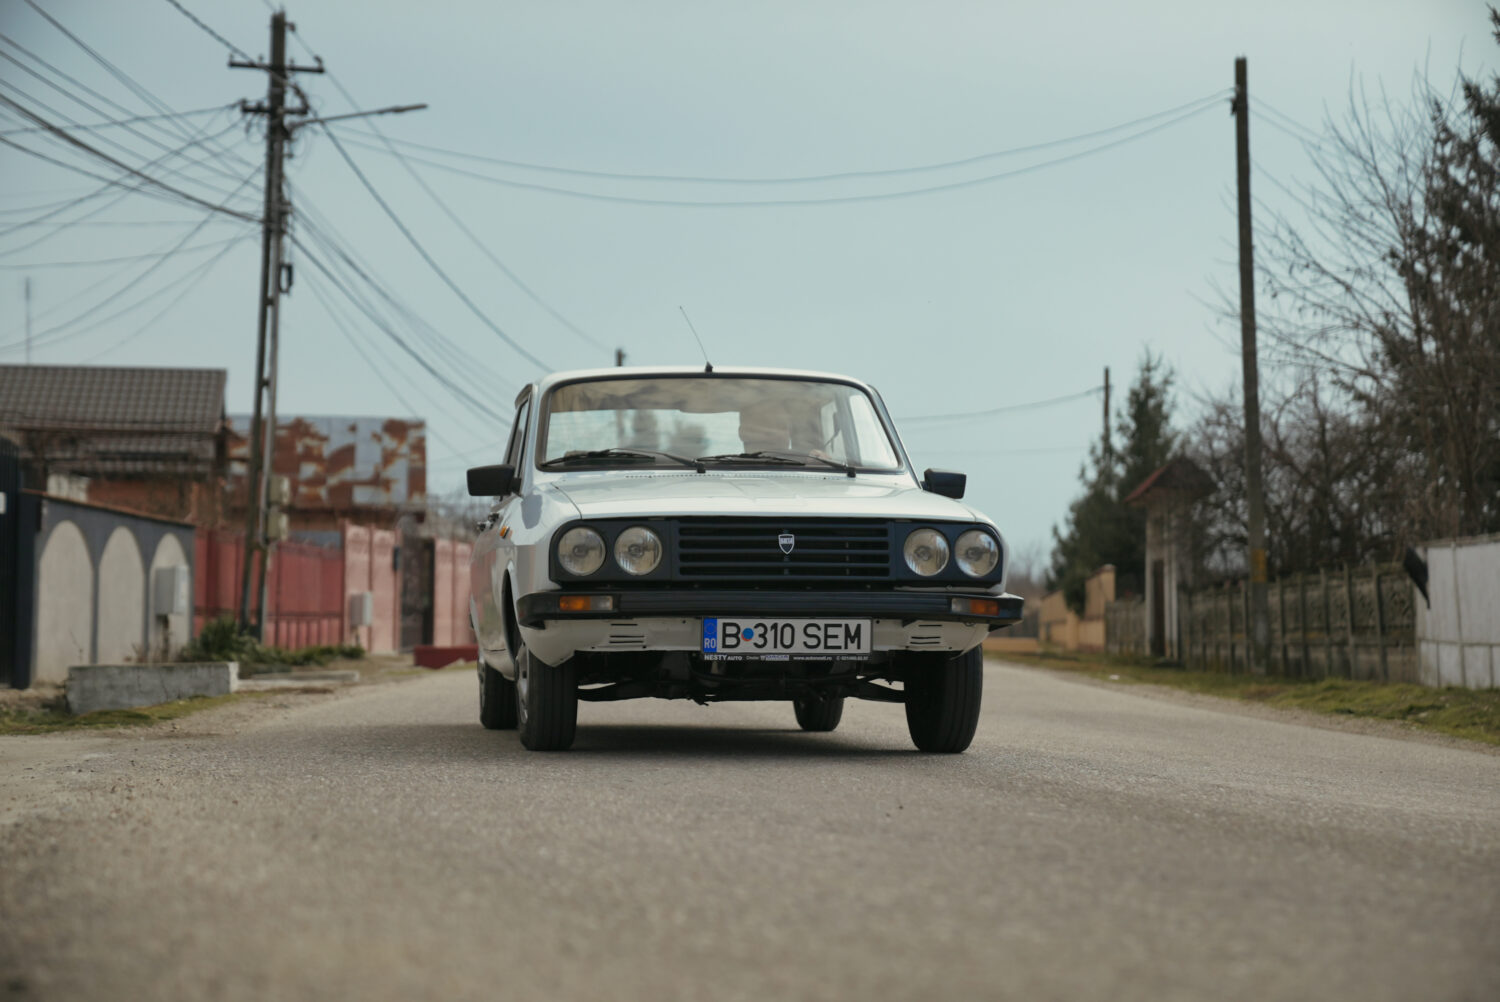 2022 - Story Dacia - Dacia 1300: The car that started it all